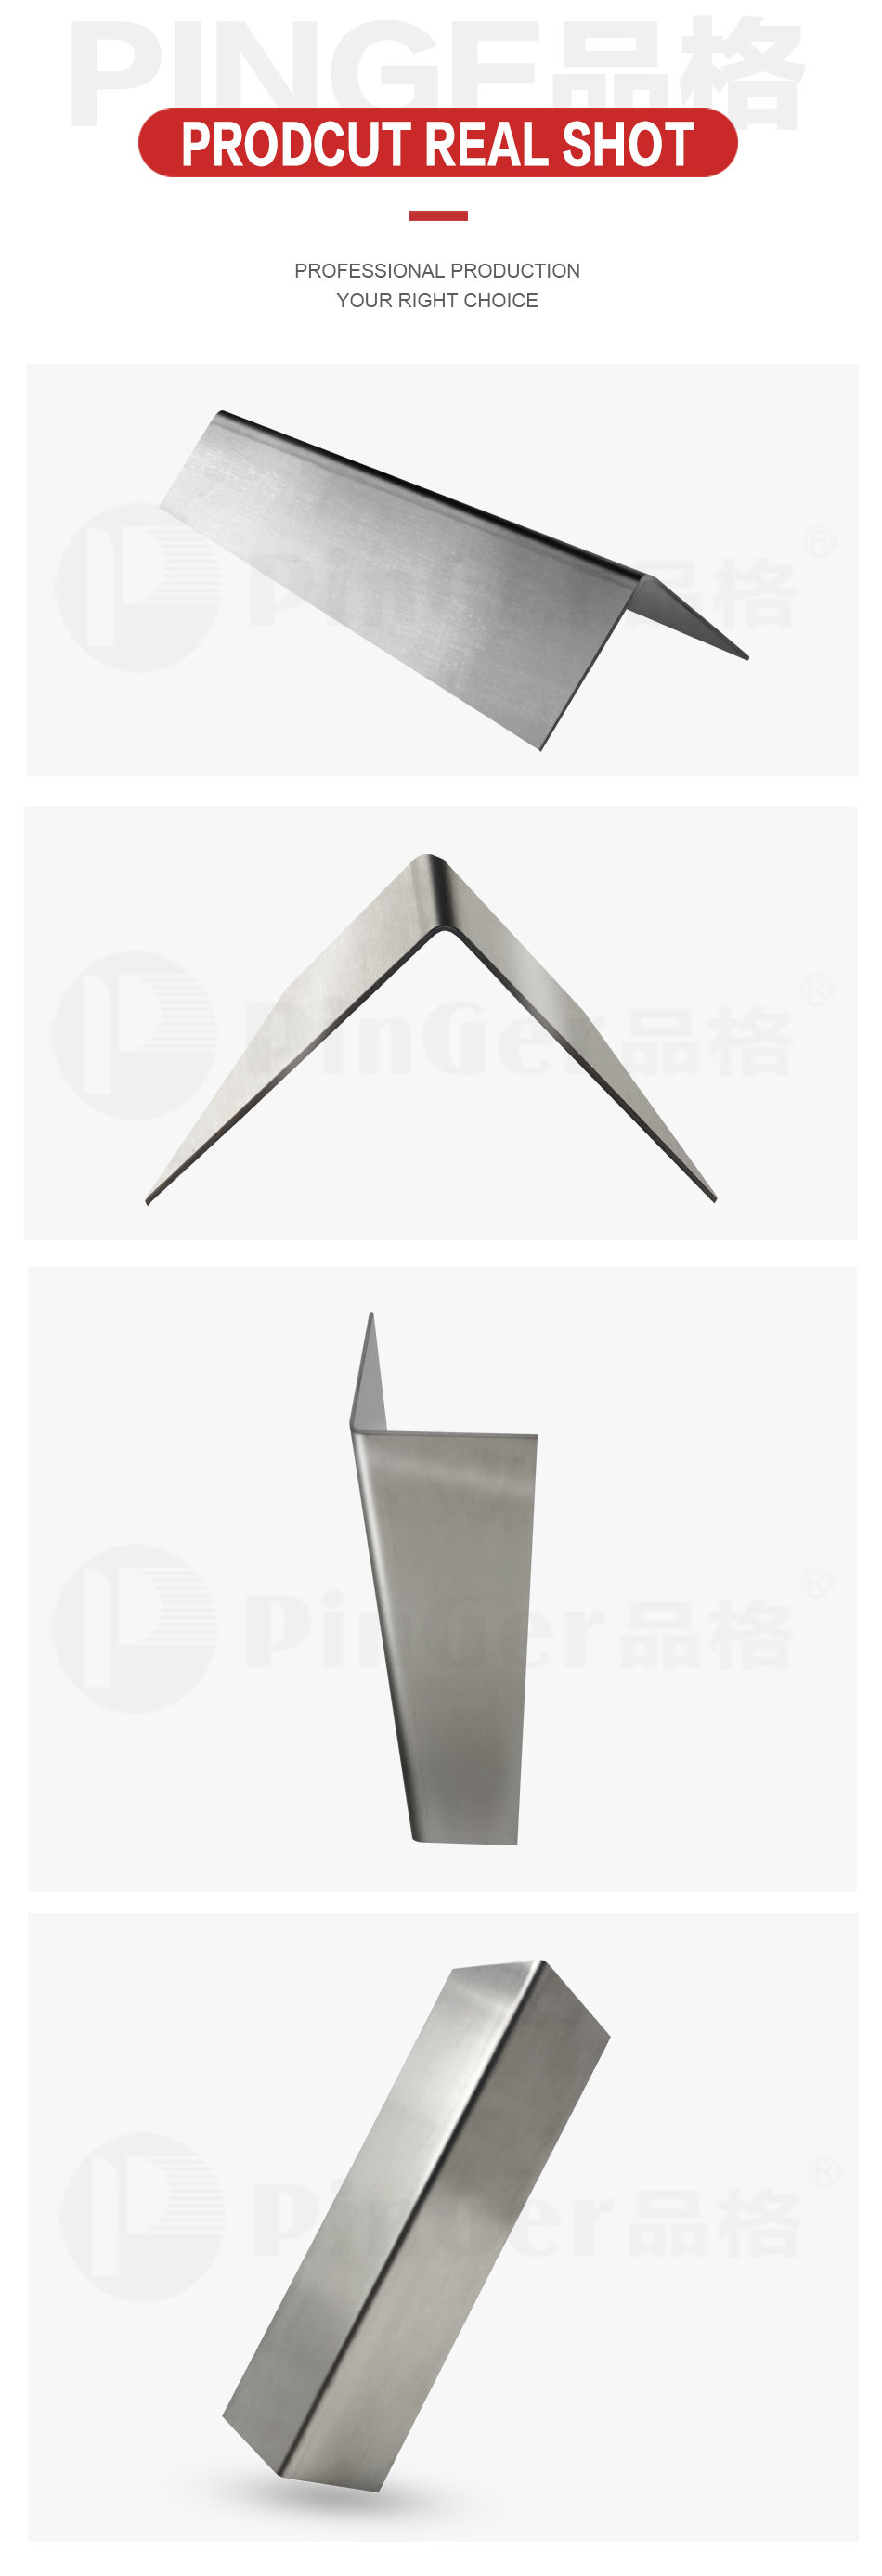 Resistant Stainless Steel Corner Guards